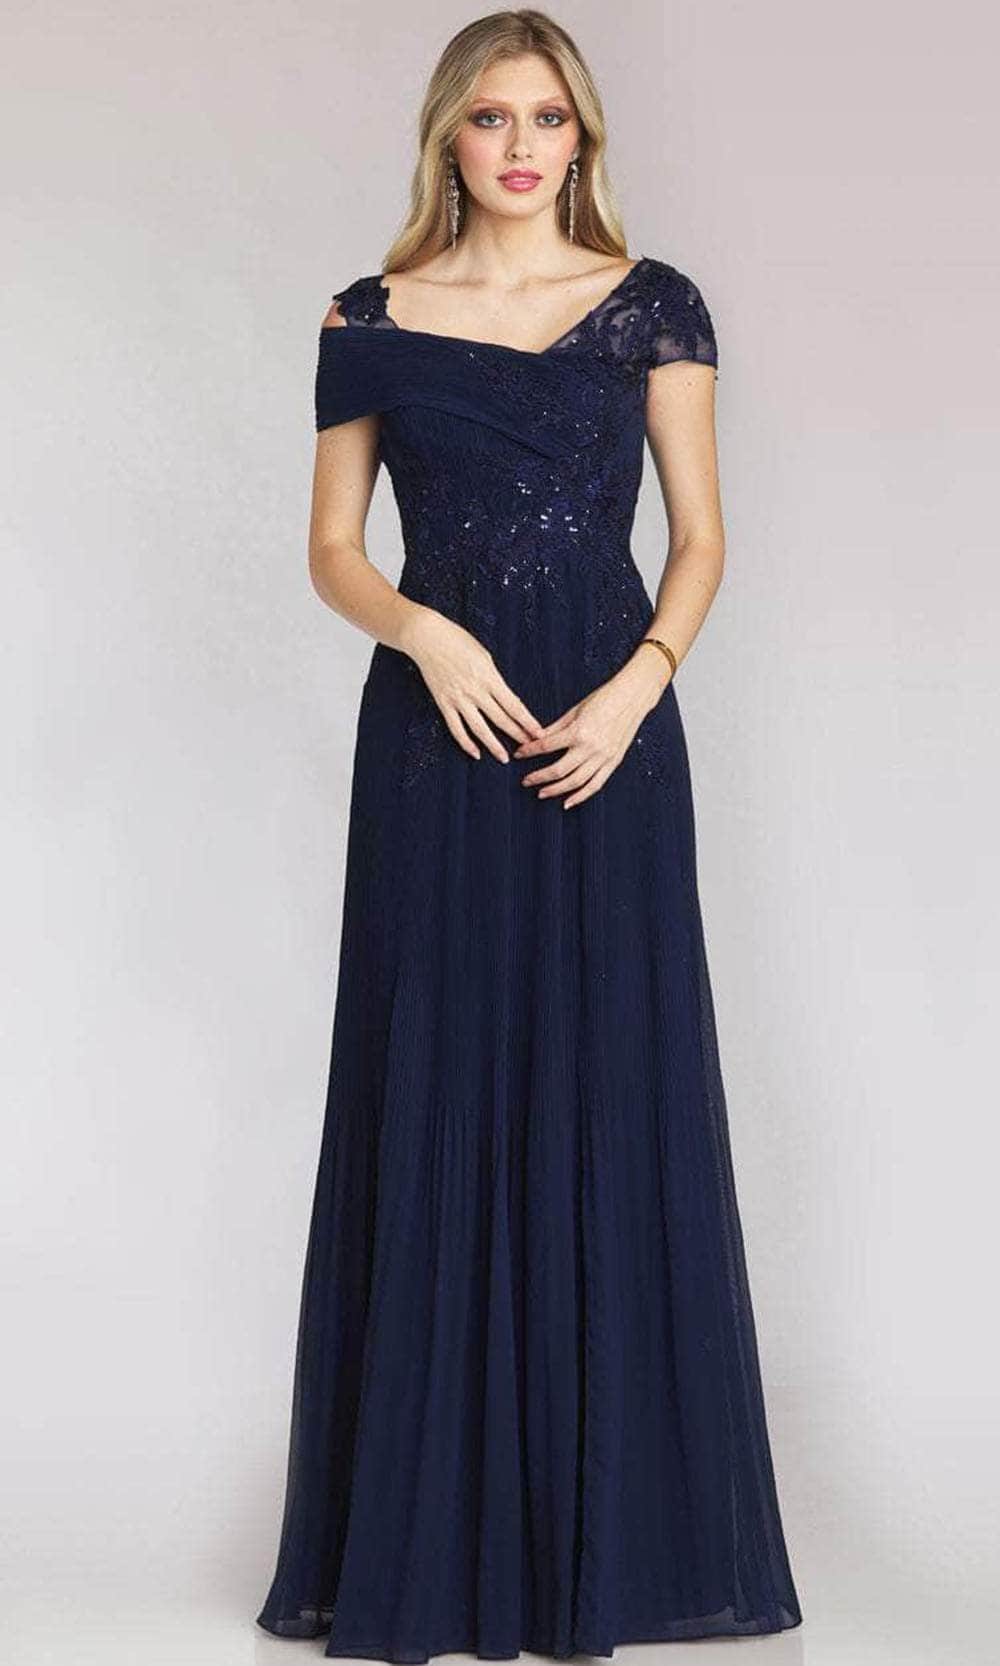 Image of Gia Franco 12209 - Refined Cap Sleeved Evening Dress